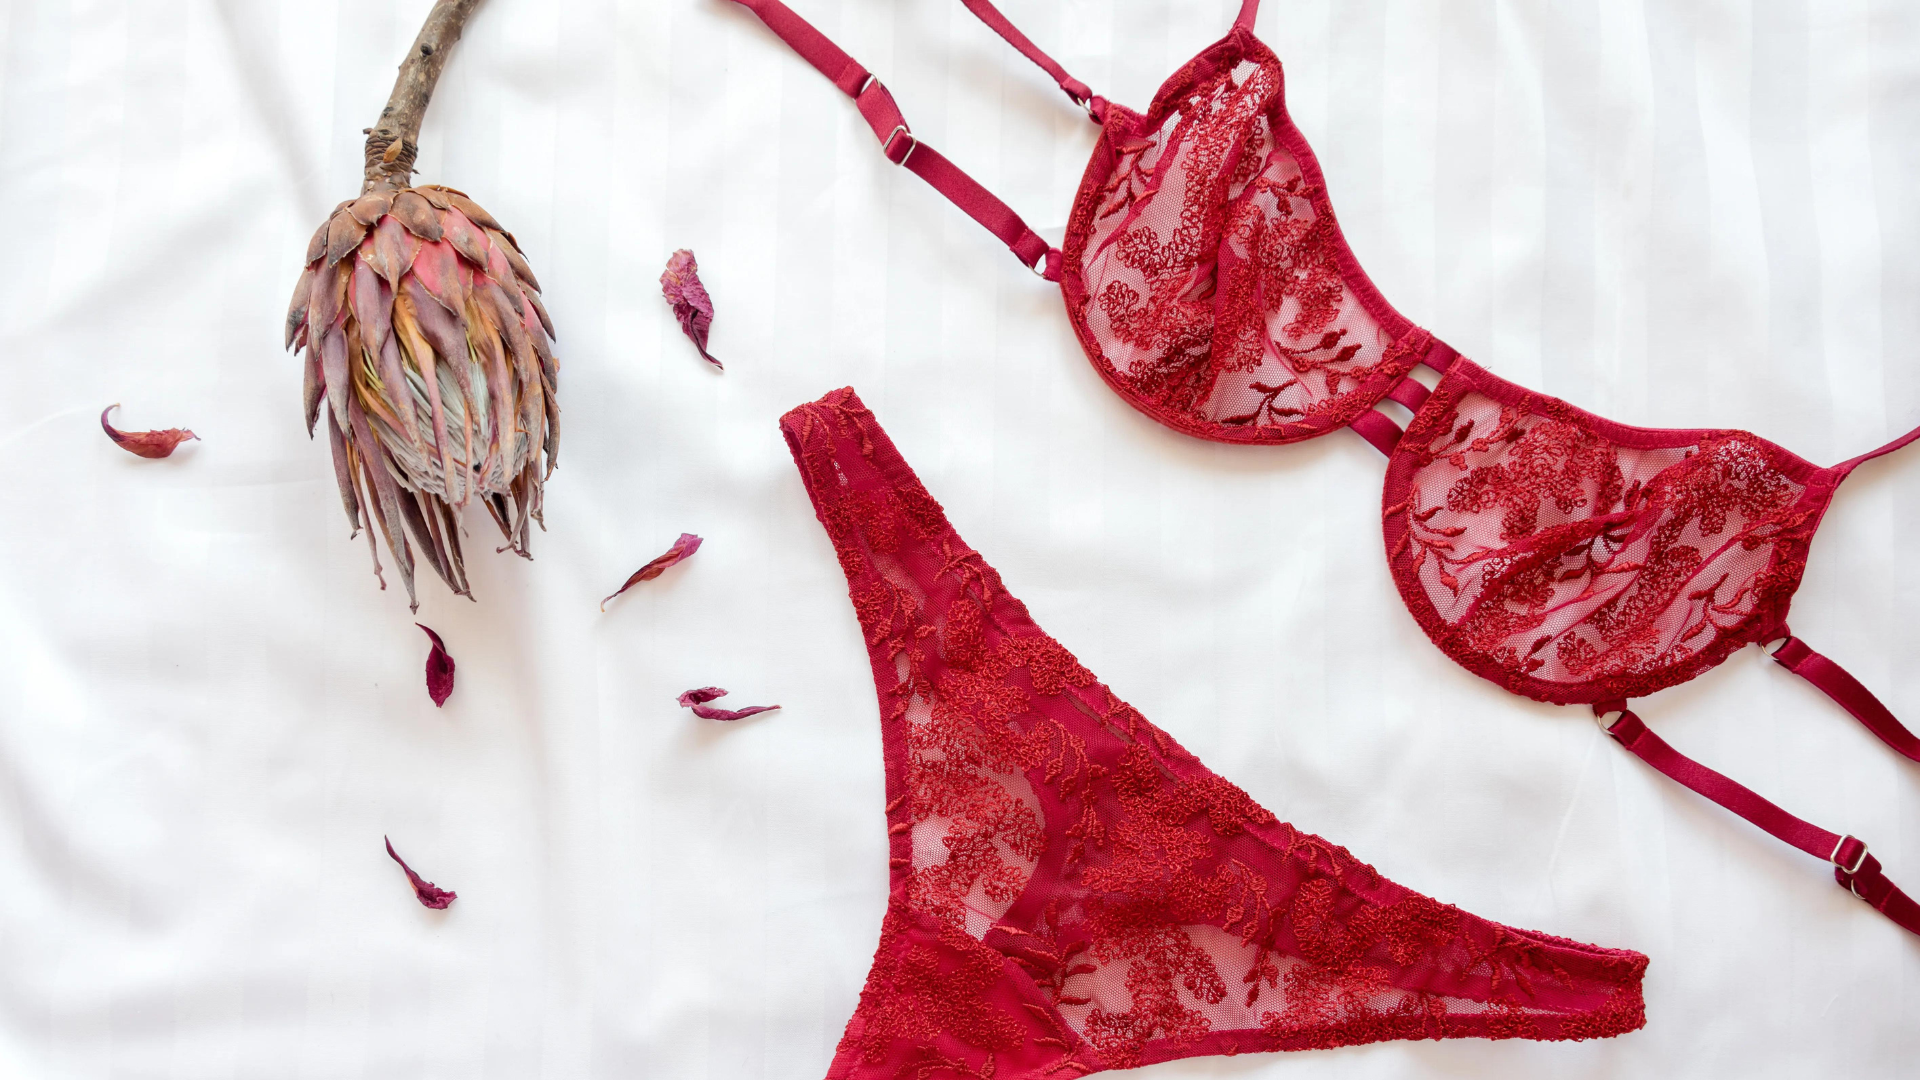 Matalan - Sundays are for chilling! 💤 Shop all women's lingerie